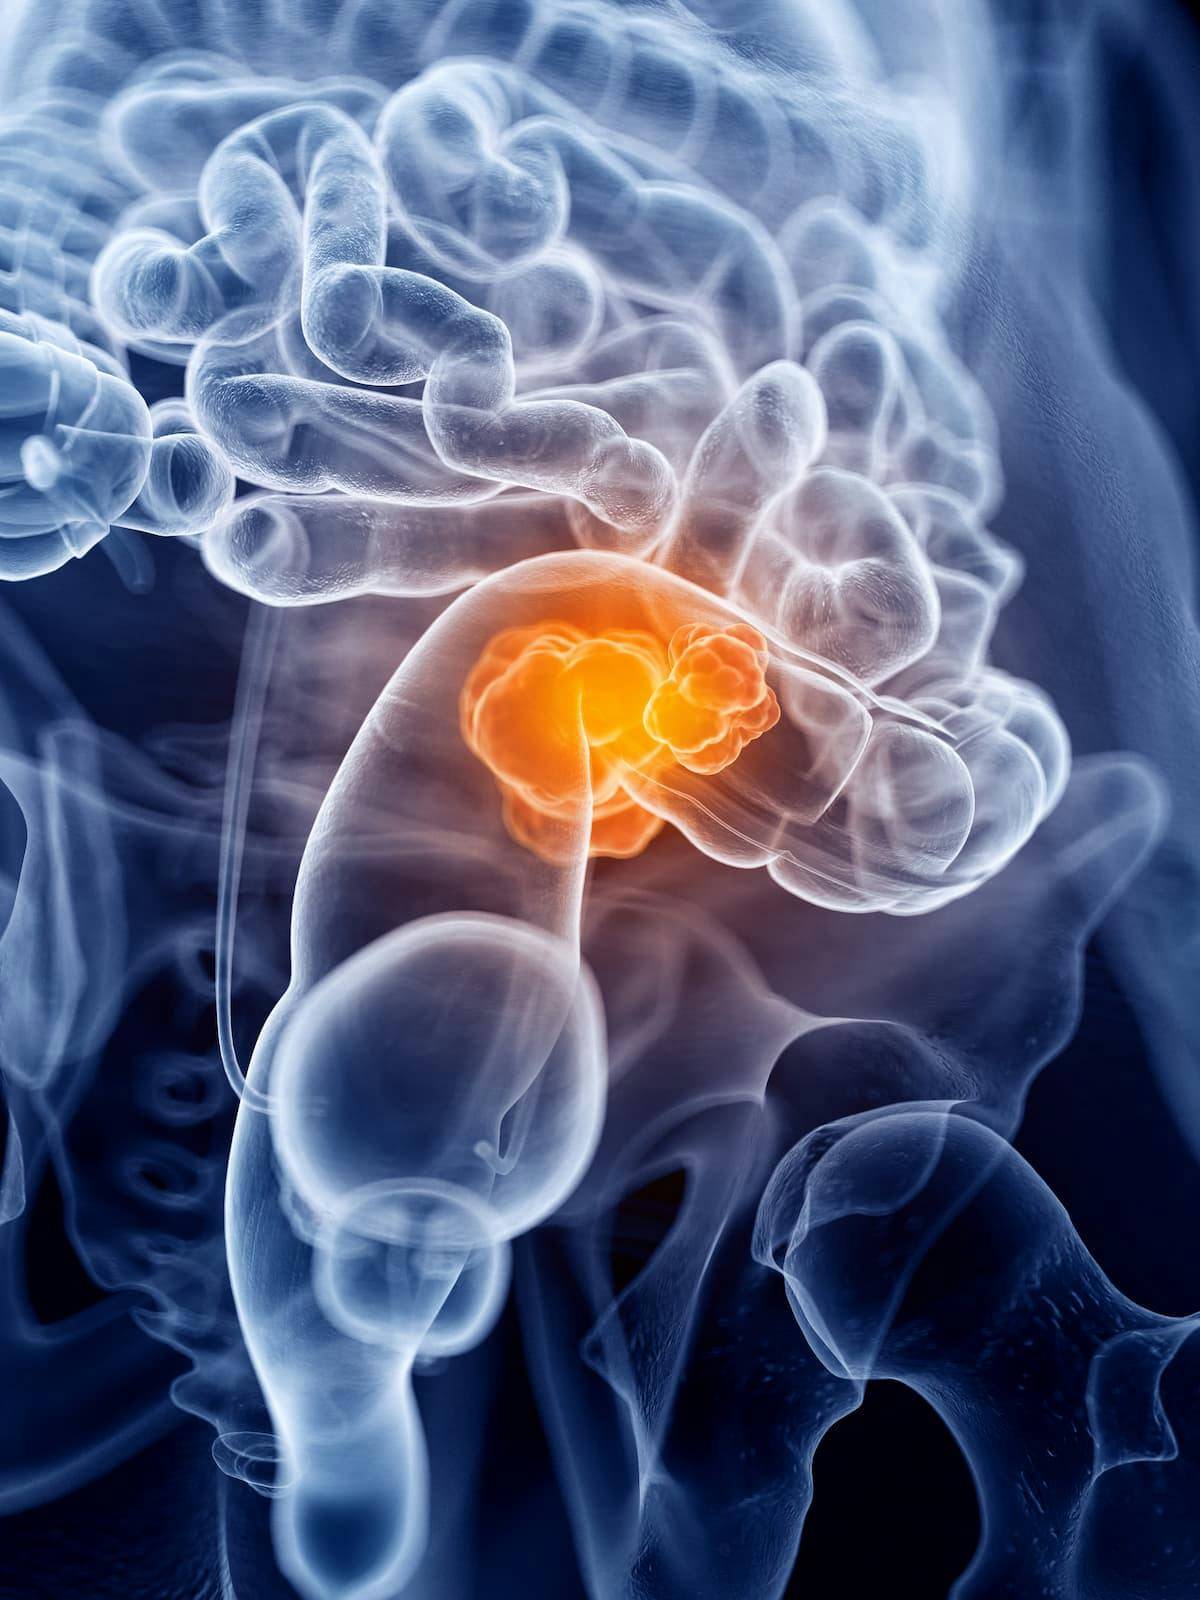 Data from a phase 2 trial support further evaluation of sacituzumab govitecan in patients with metastatic urothelial cancer following immune checkpoint inhibitor therapy, according to the lead investigator. 